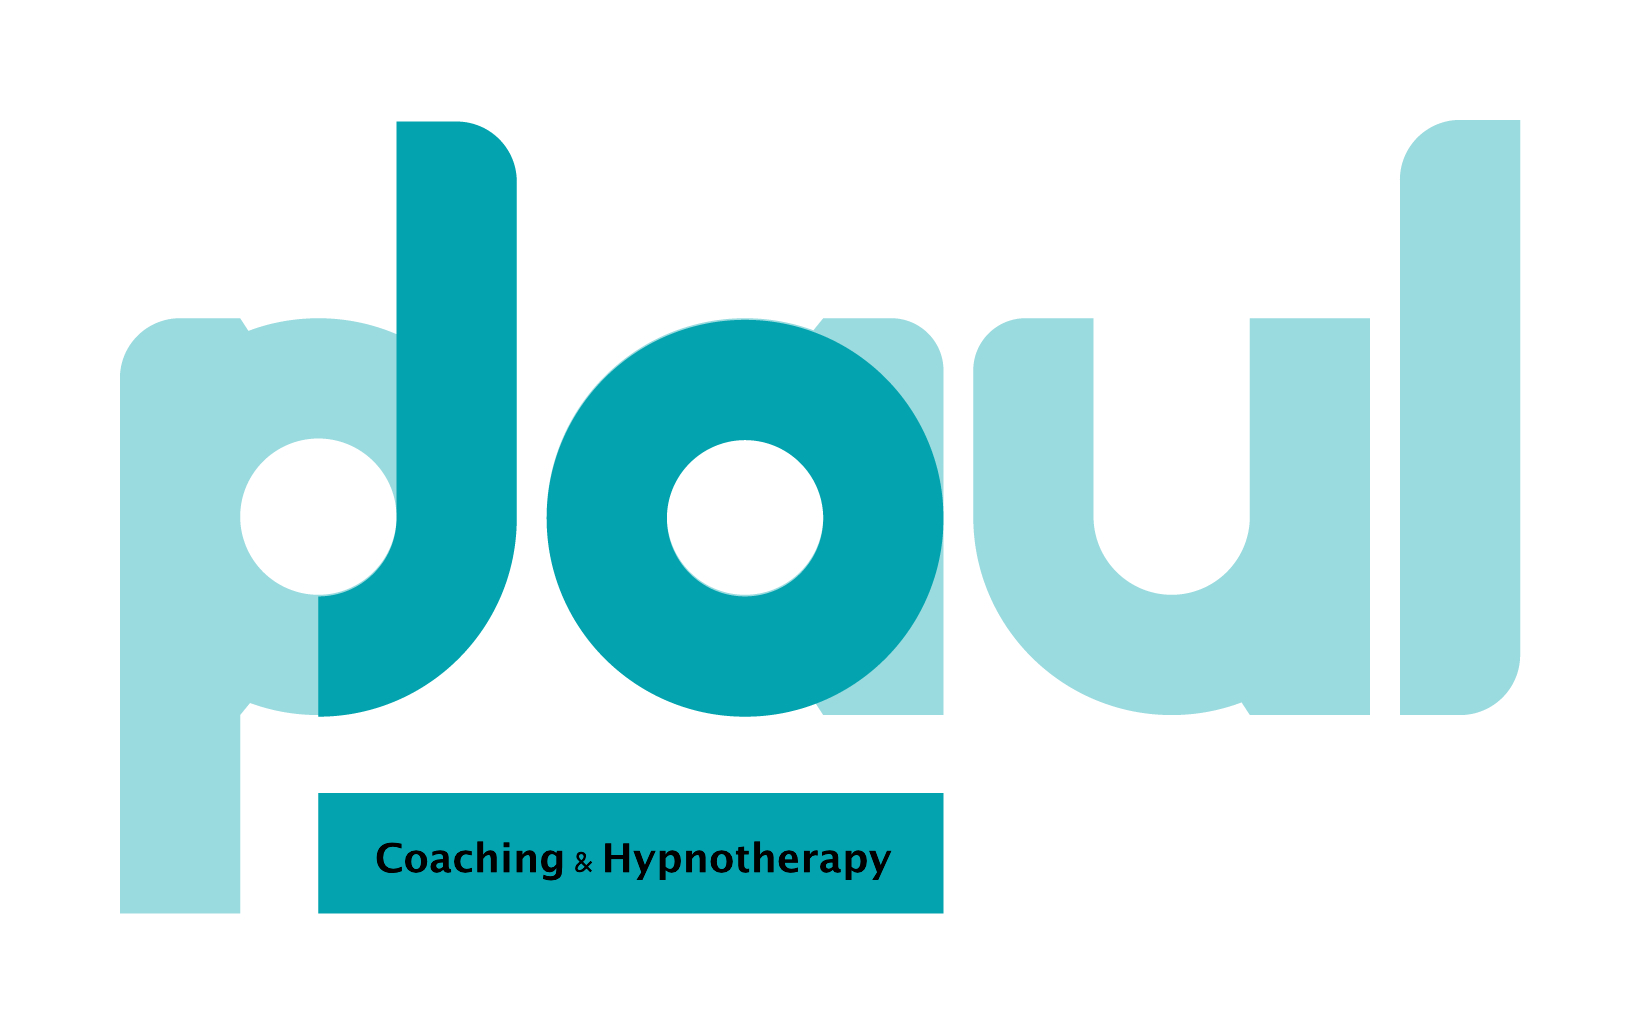 Jo Paul Coaching, Hypnotherapy & Wellbeing